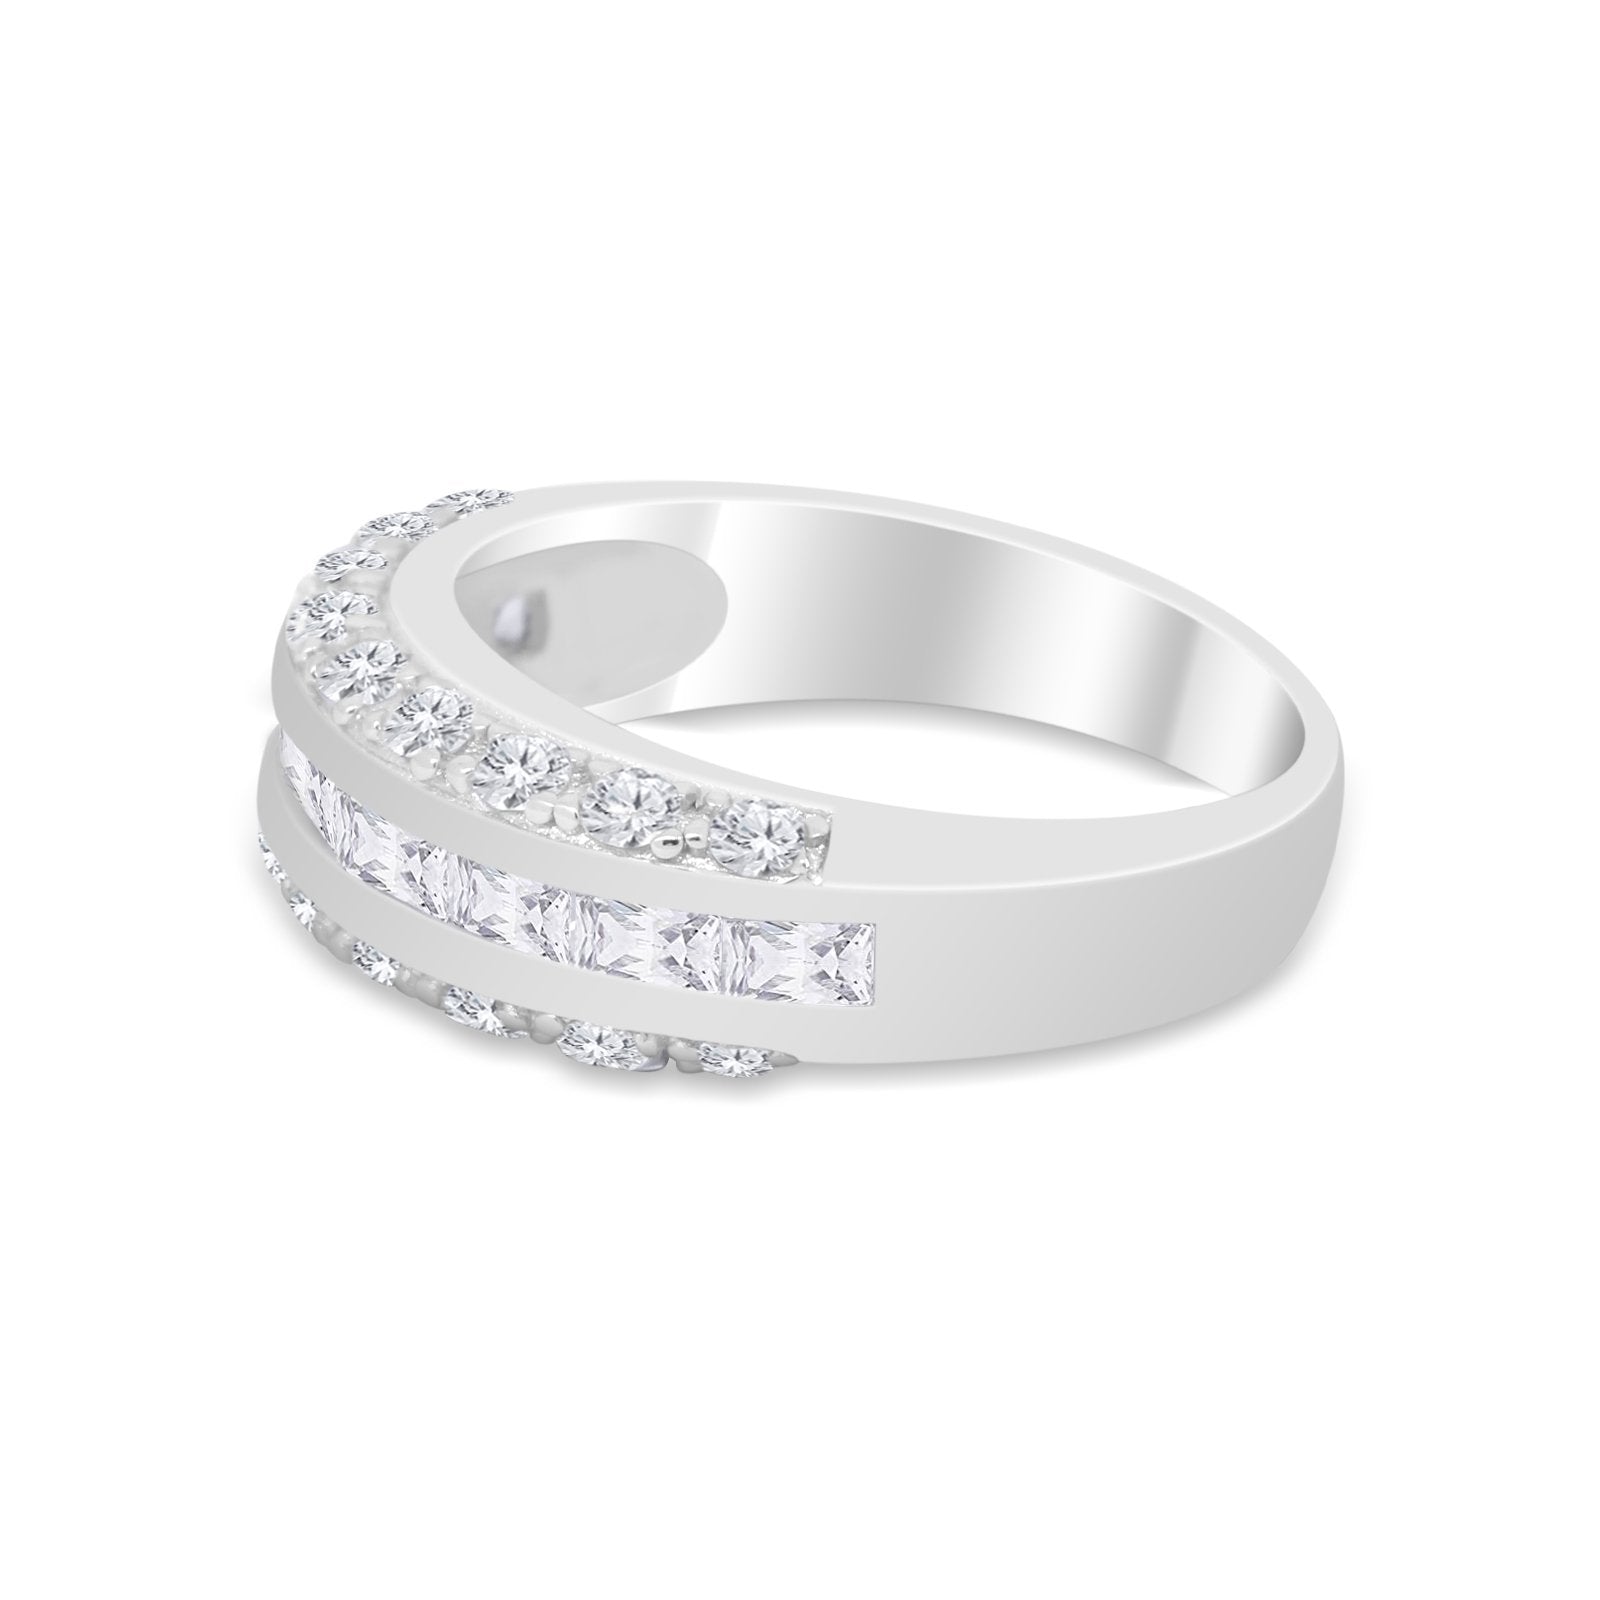 Half Eternity Wedding Band Simulated Cubic Zirconia 925 Sterling Silver